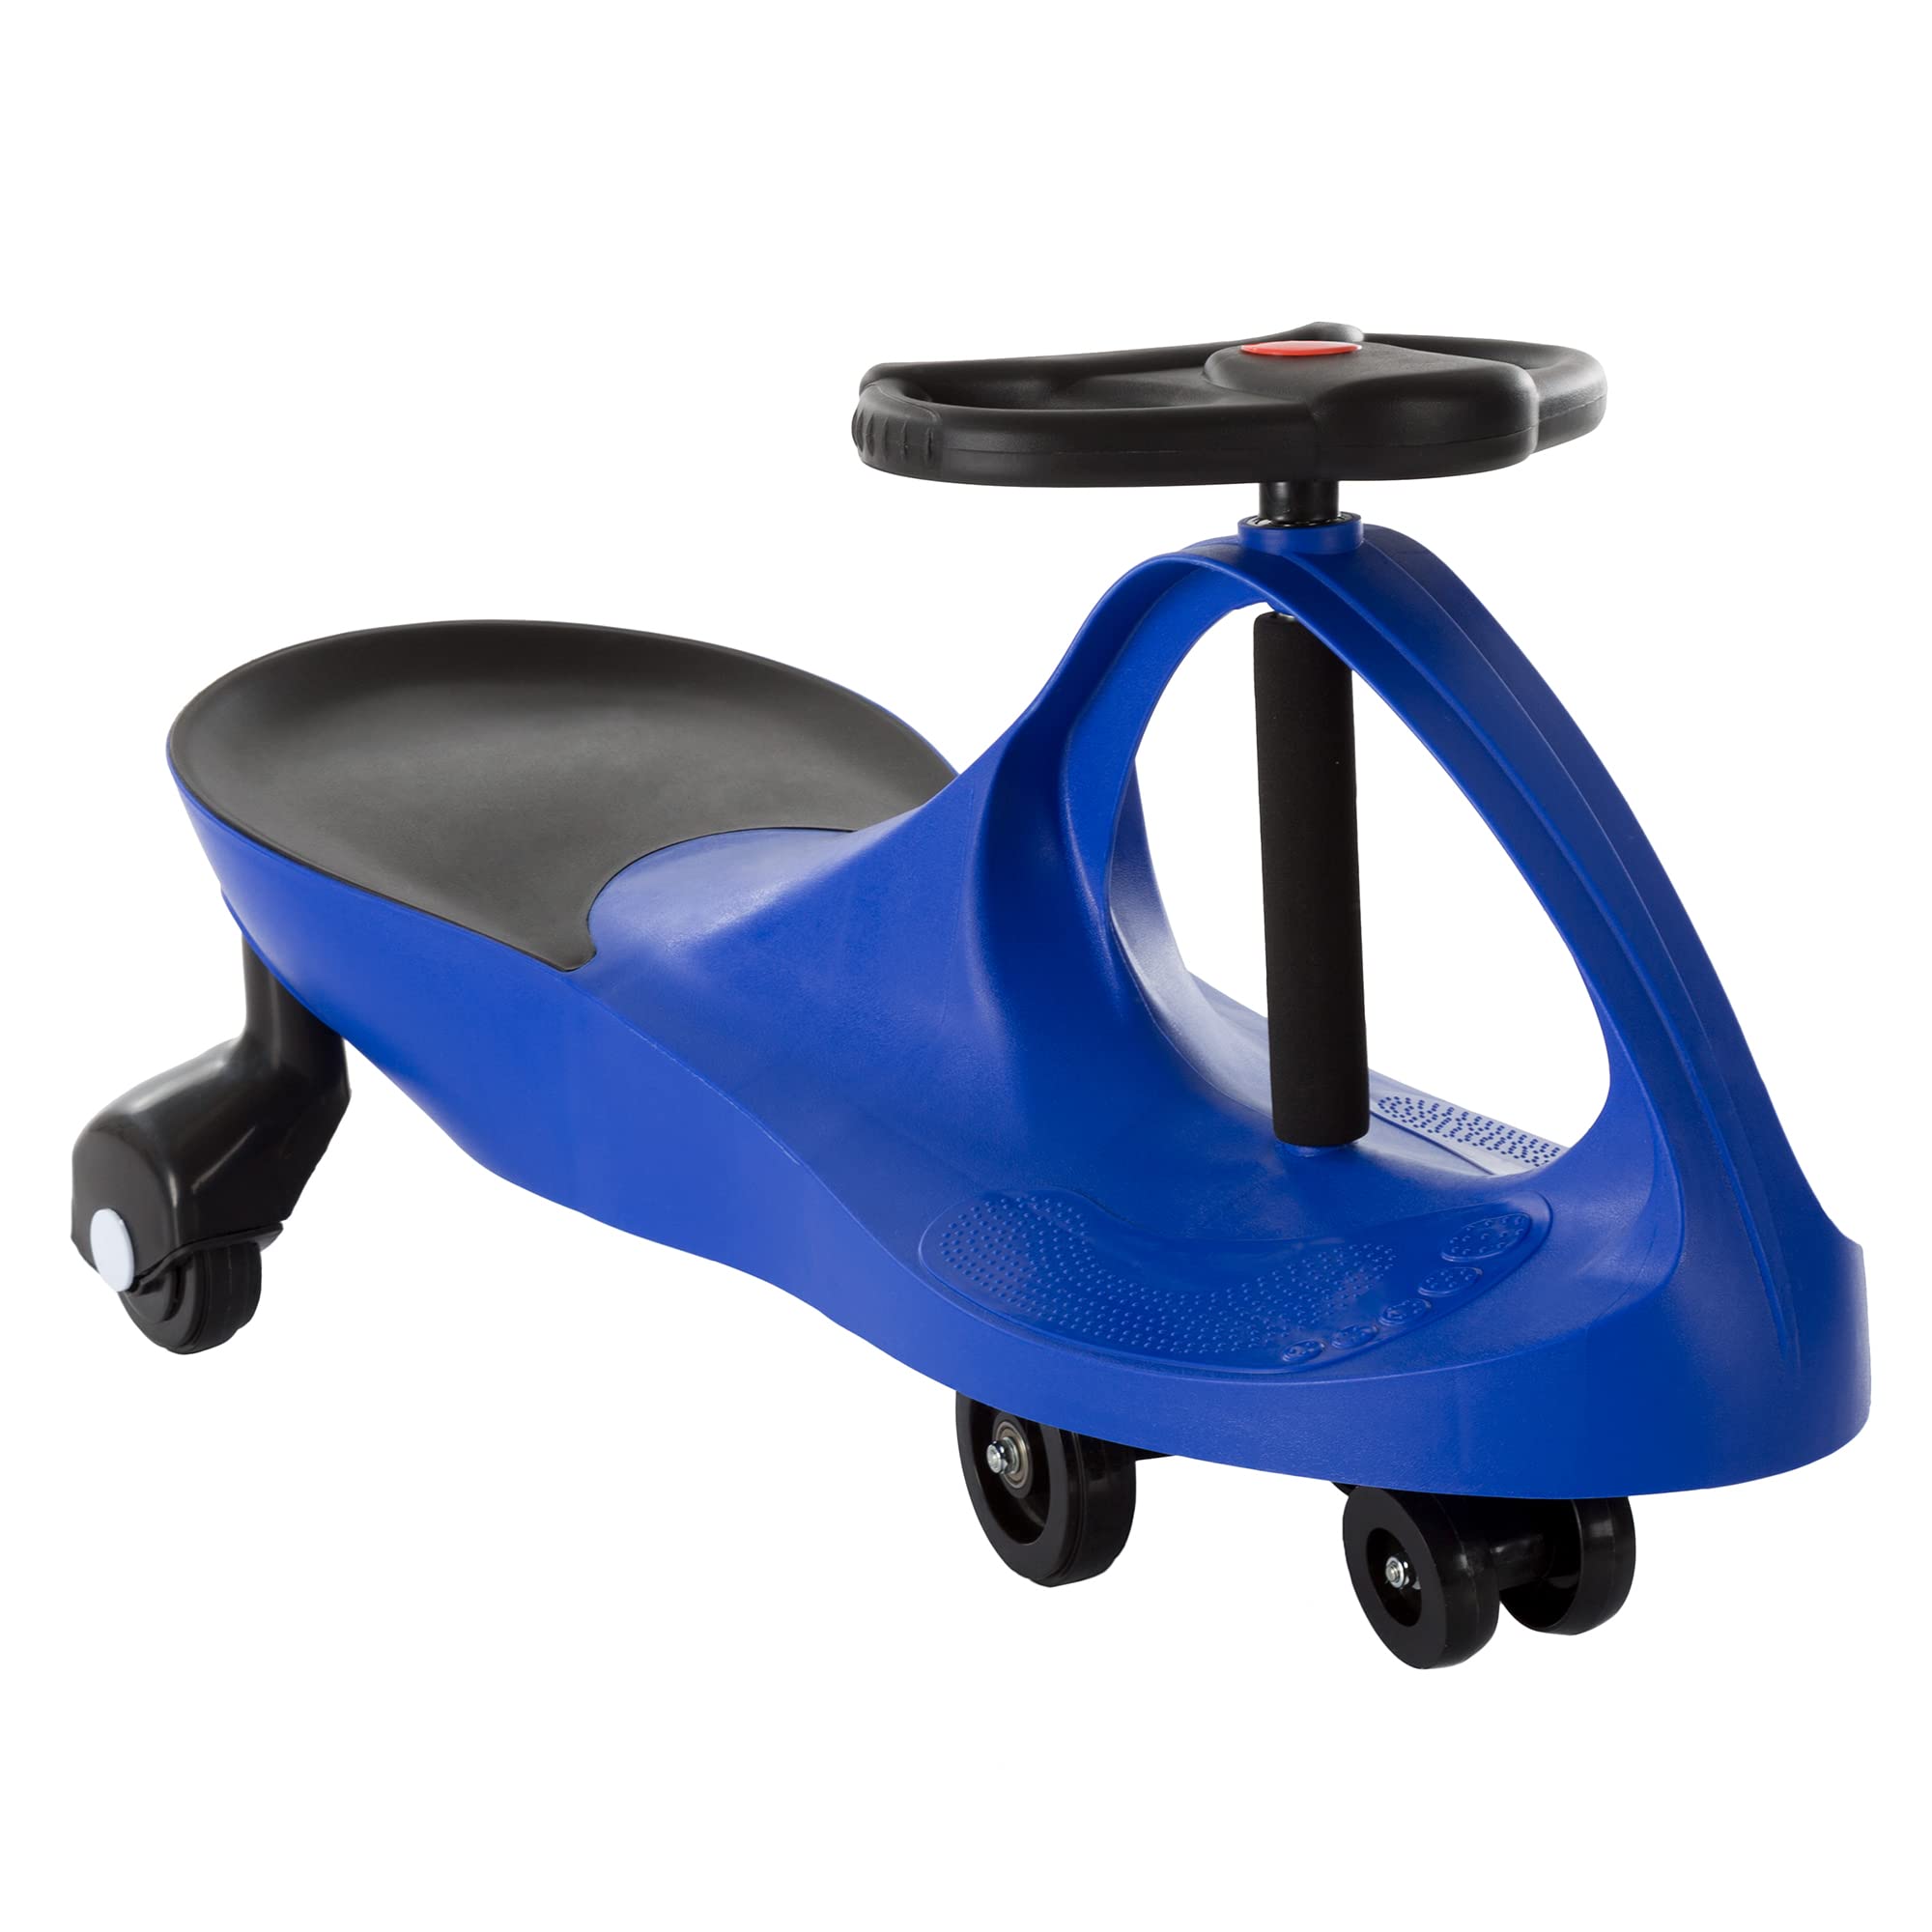 Lil' Rider Wiggle Car Ride on Toy - No Batteries, Gears, or Pedals - Just Twist, Swivel, and Go - Outdoor Ride on for Kids 3 Years and Up (Blue), Large